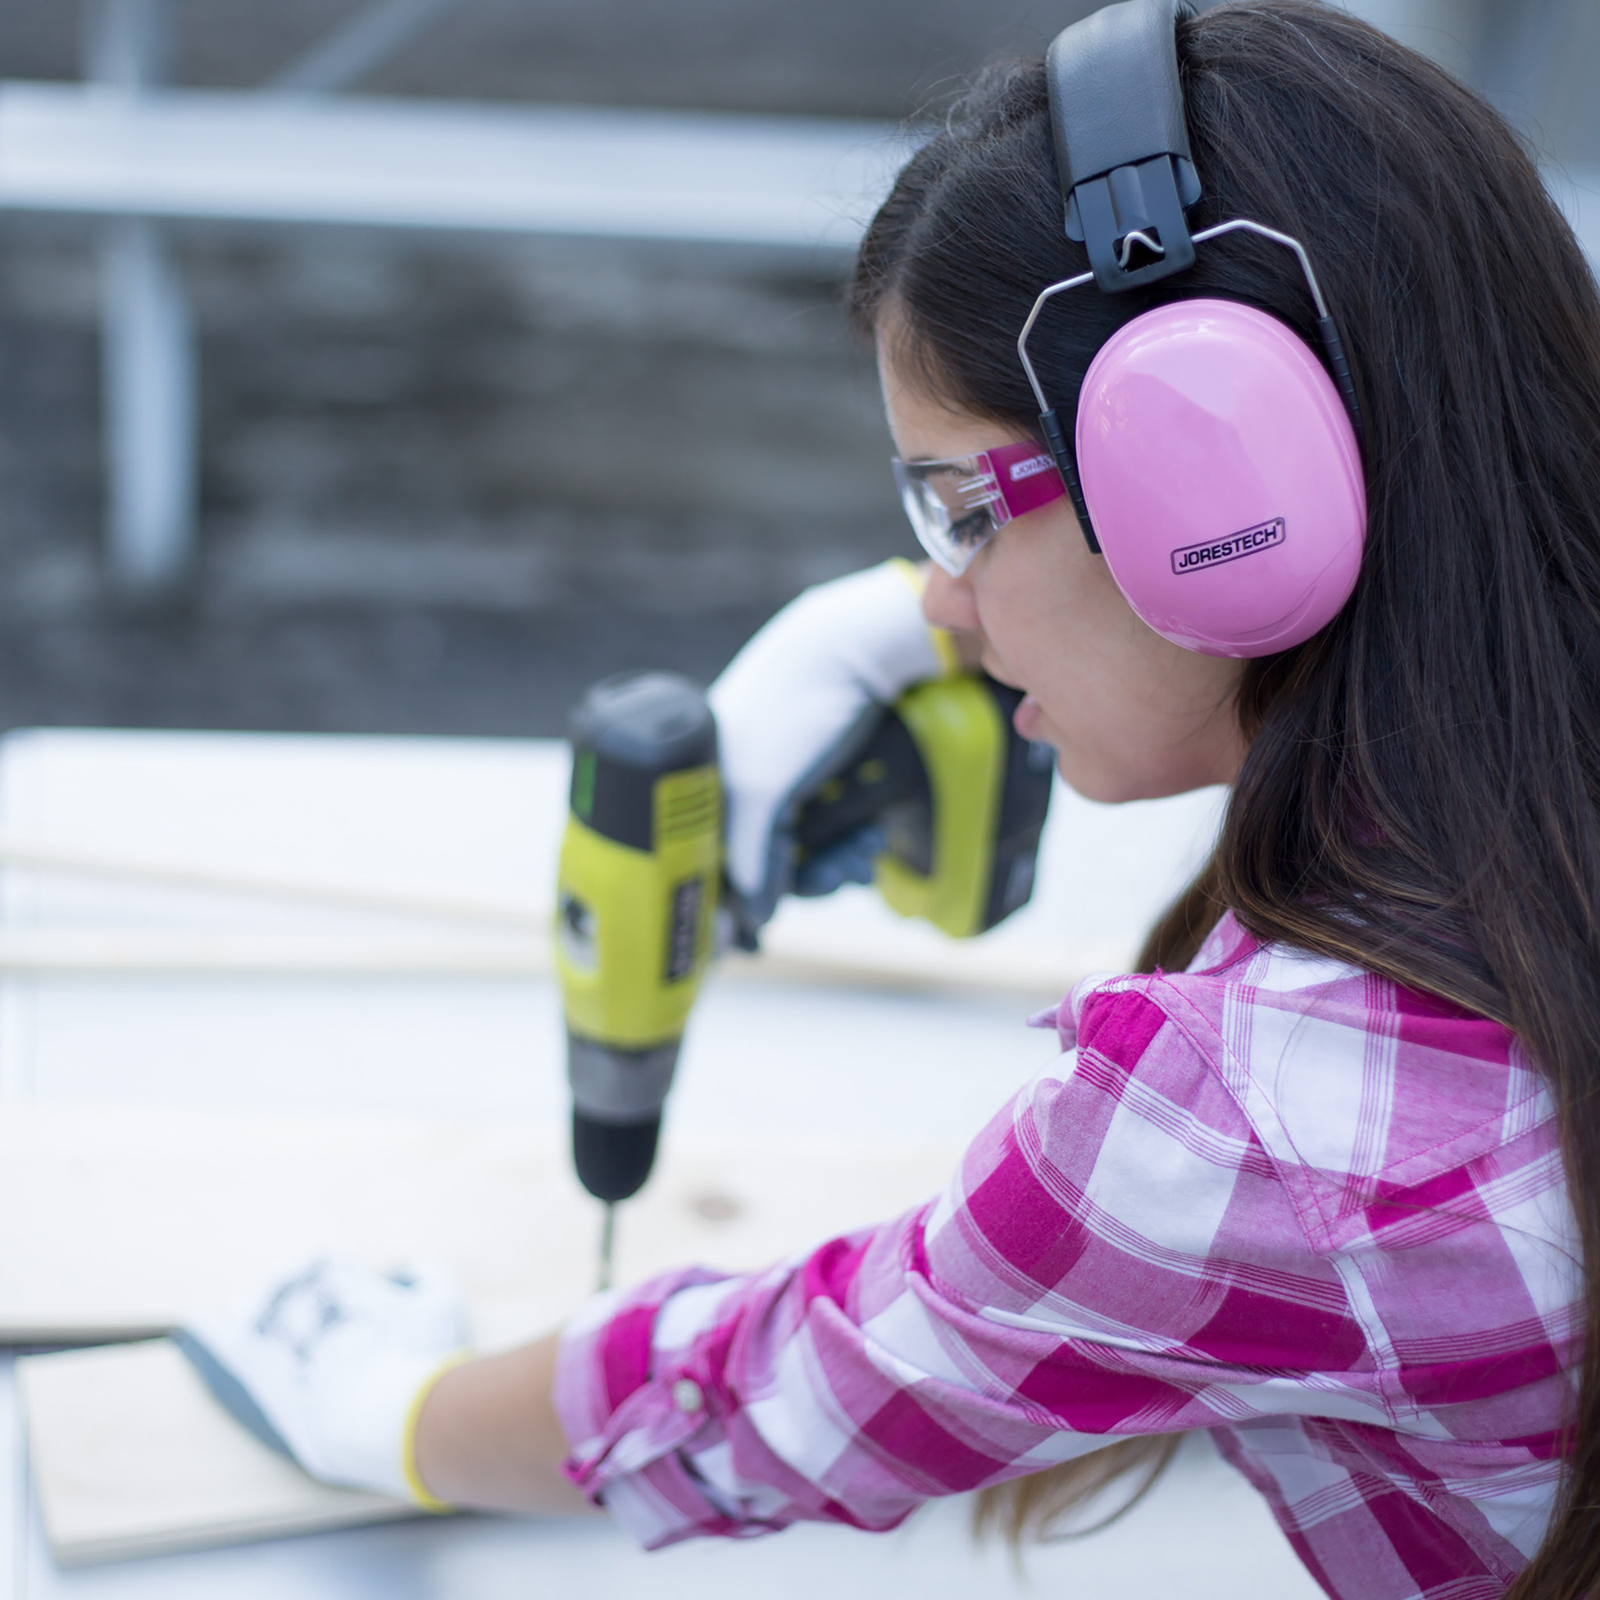 A lady wearing pink JORESTECH ear muffs for noise canceling while she is using loud power tools